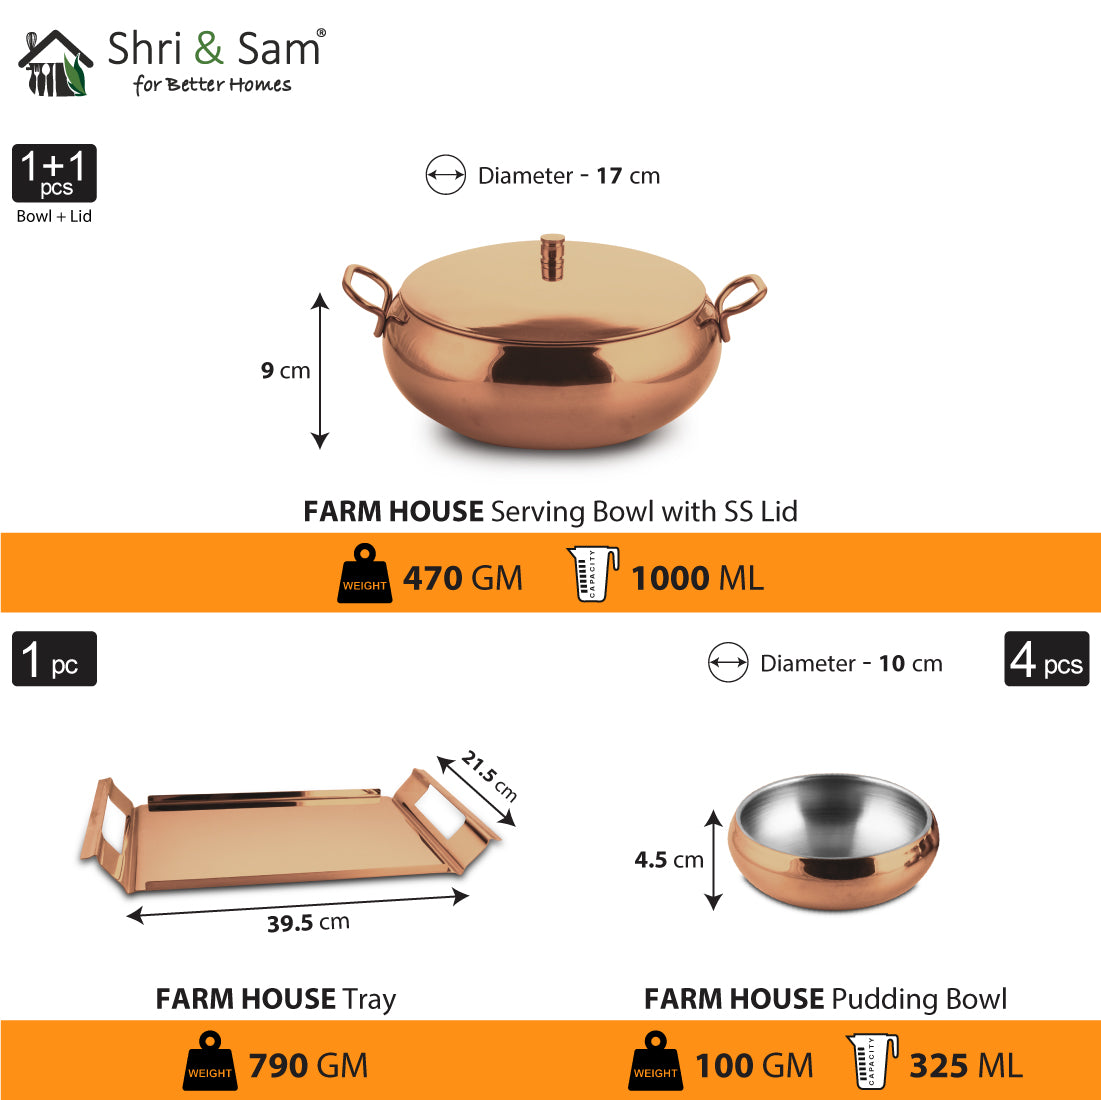 Stainless Steel Serving Set with Rose Gold PVD Coating Farm House